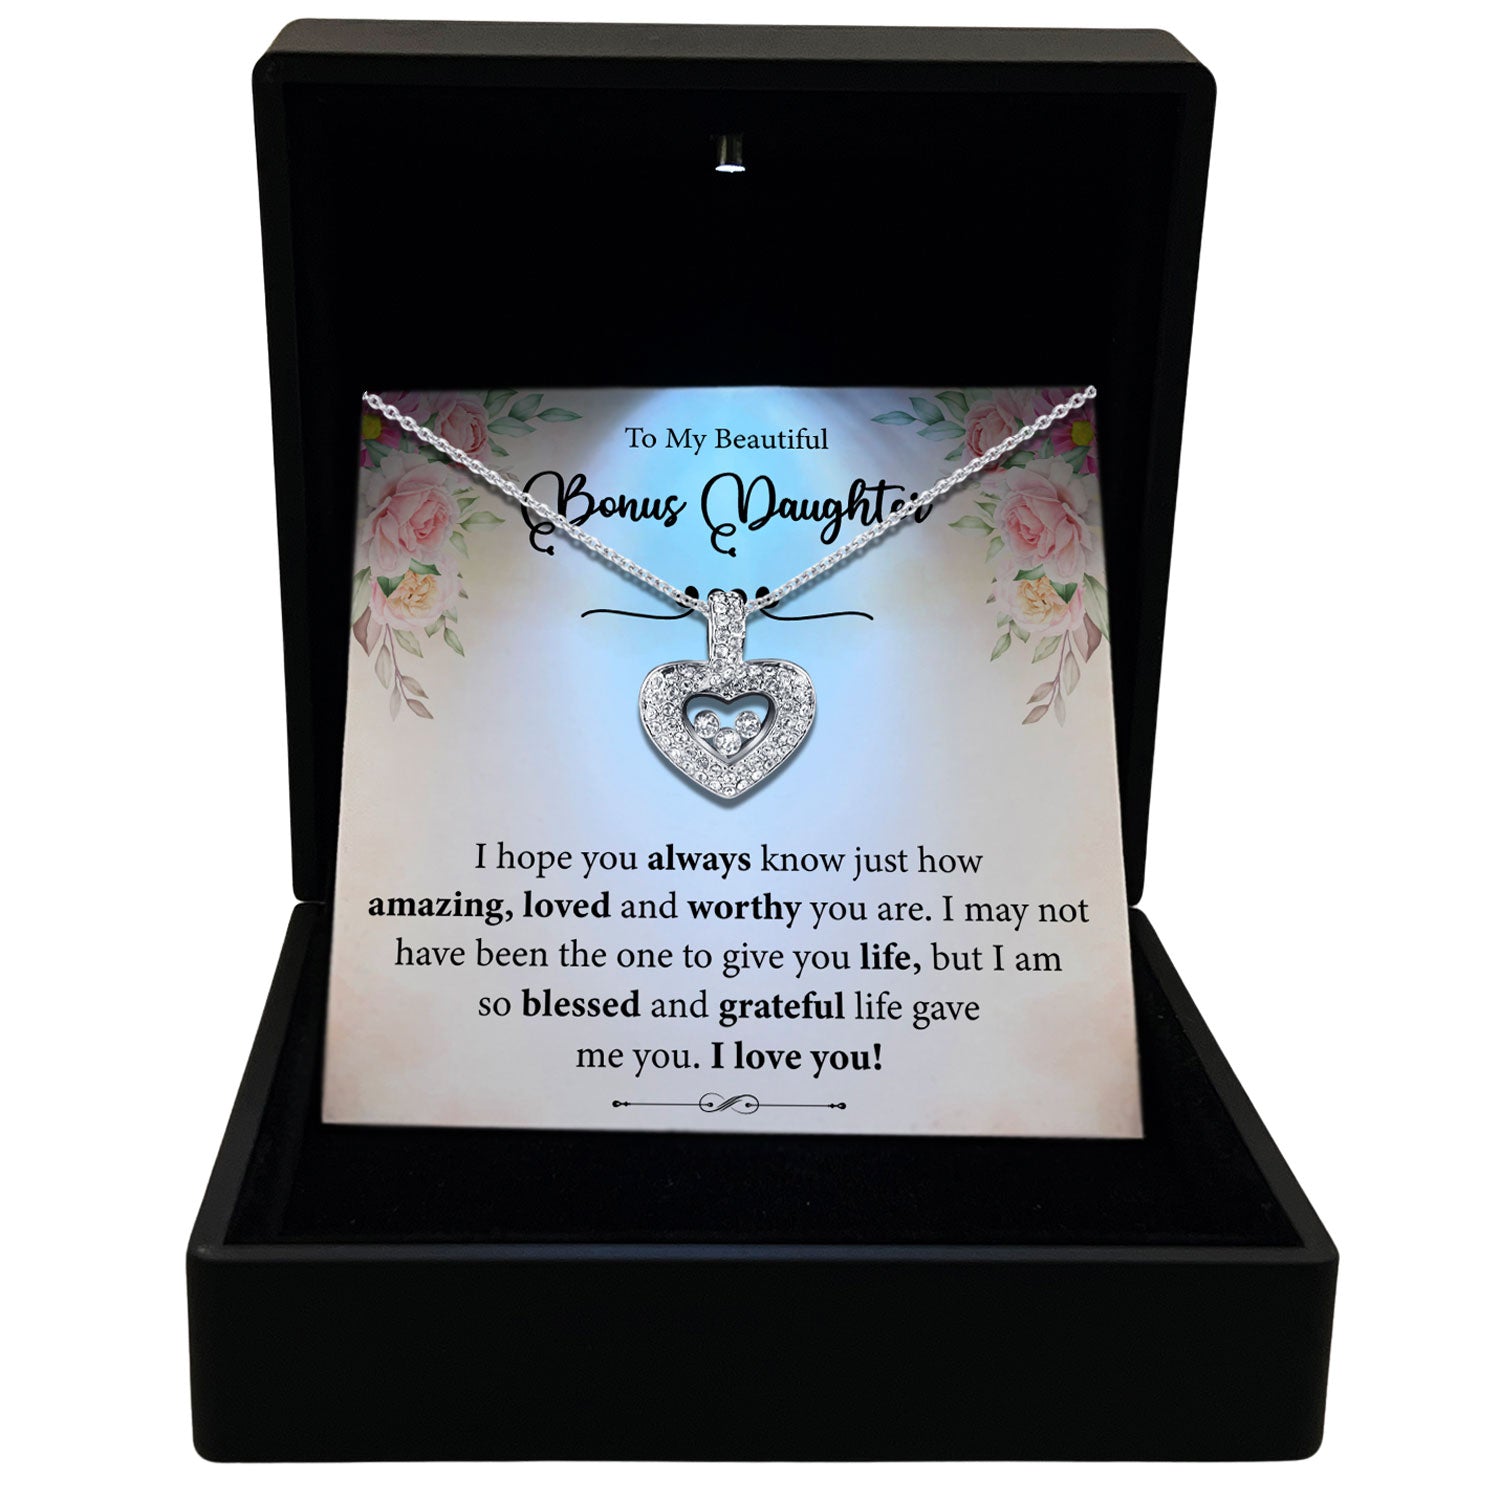 To My Beautiful Bonus Daughter - I am So Blessed - Tryndi Floating Heart Necklace